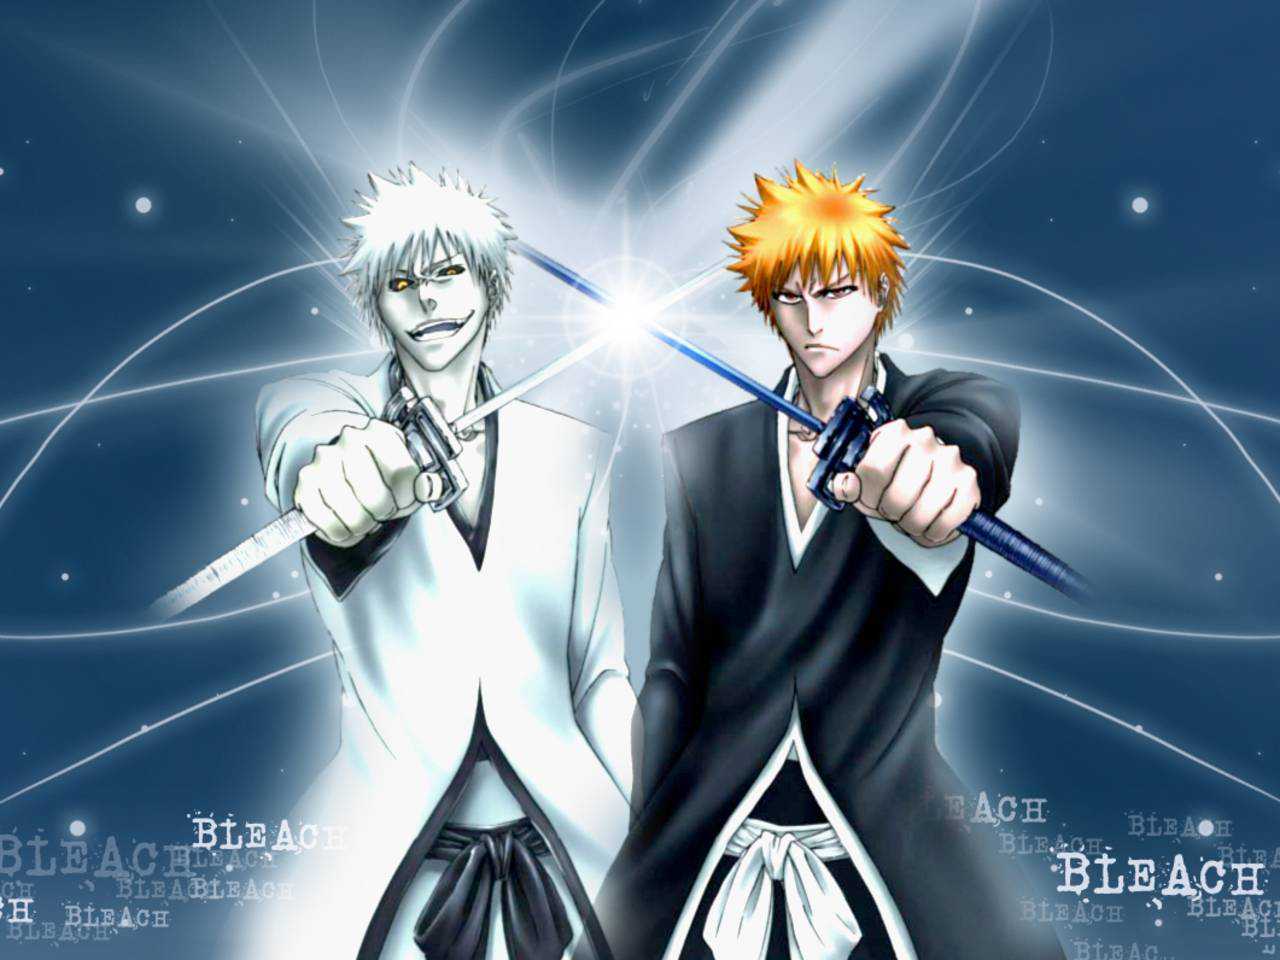 Bleach Background - KoLPaPer - Awesome Free HD Wallpapers